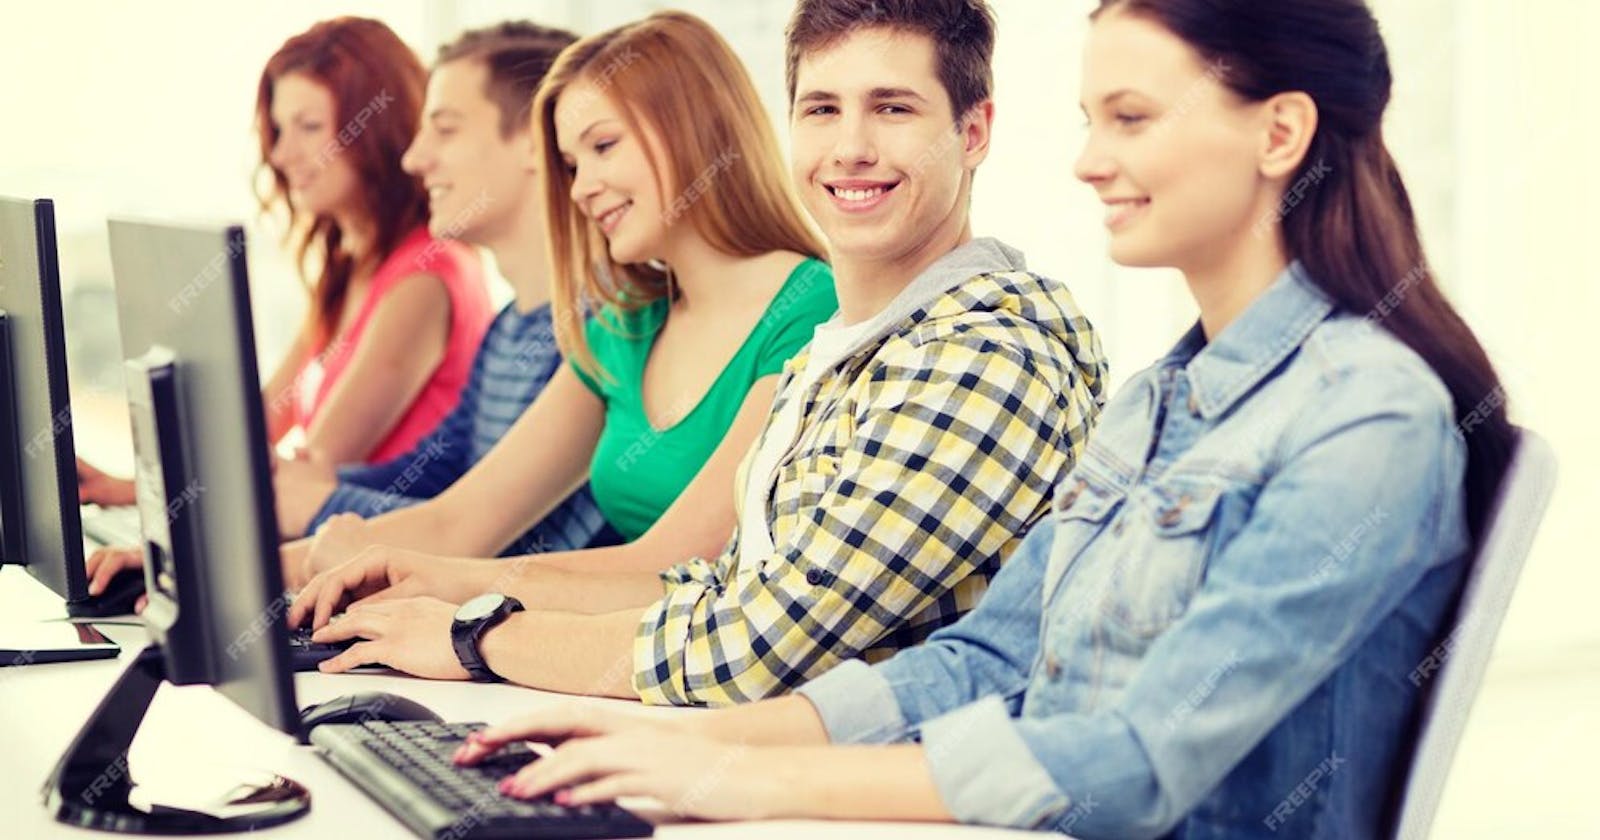 Advanced IT training center with advanced coding bootcamp for software developers